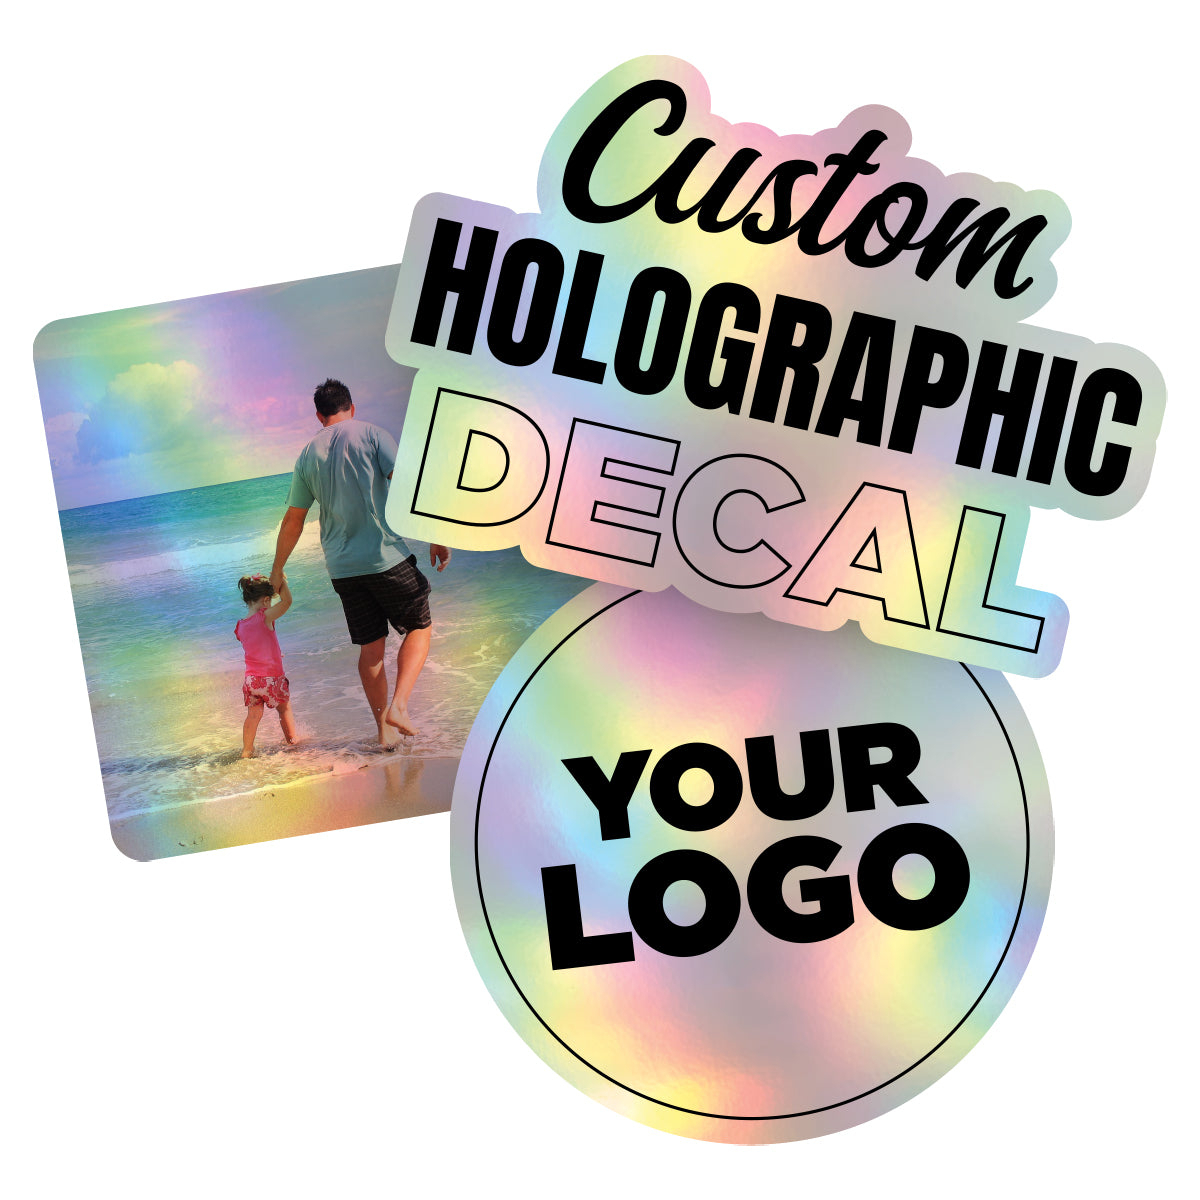 Personalized Holographic Vinyl Sticker Decal Custom Made Any Logo, Image, Text, Or Name Die Cut To Shape - 50 Pack, 10 Inch, Square